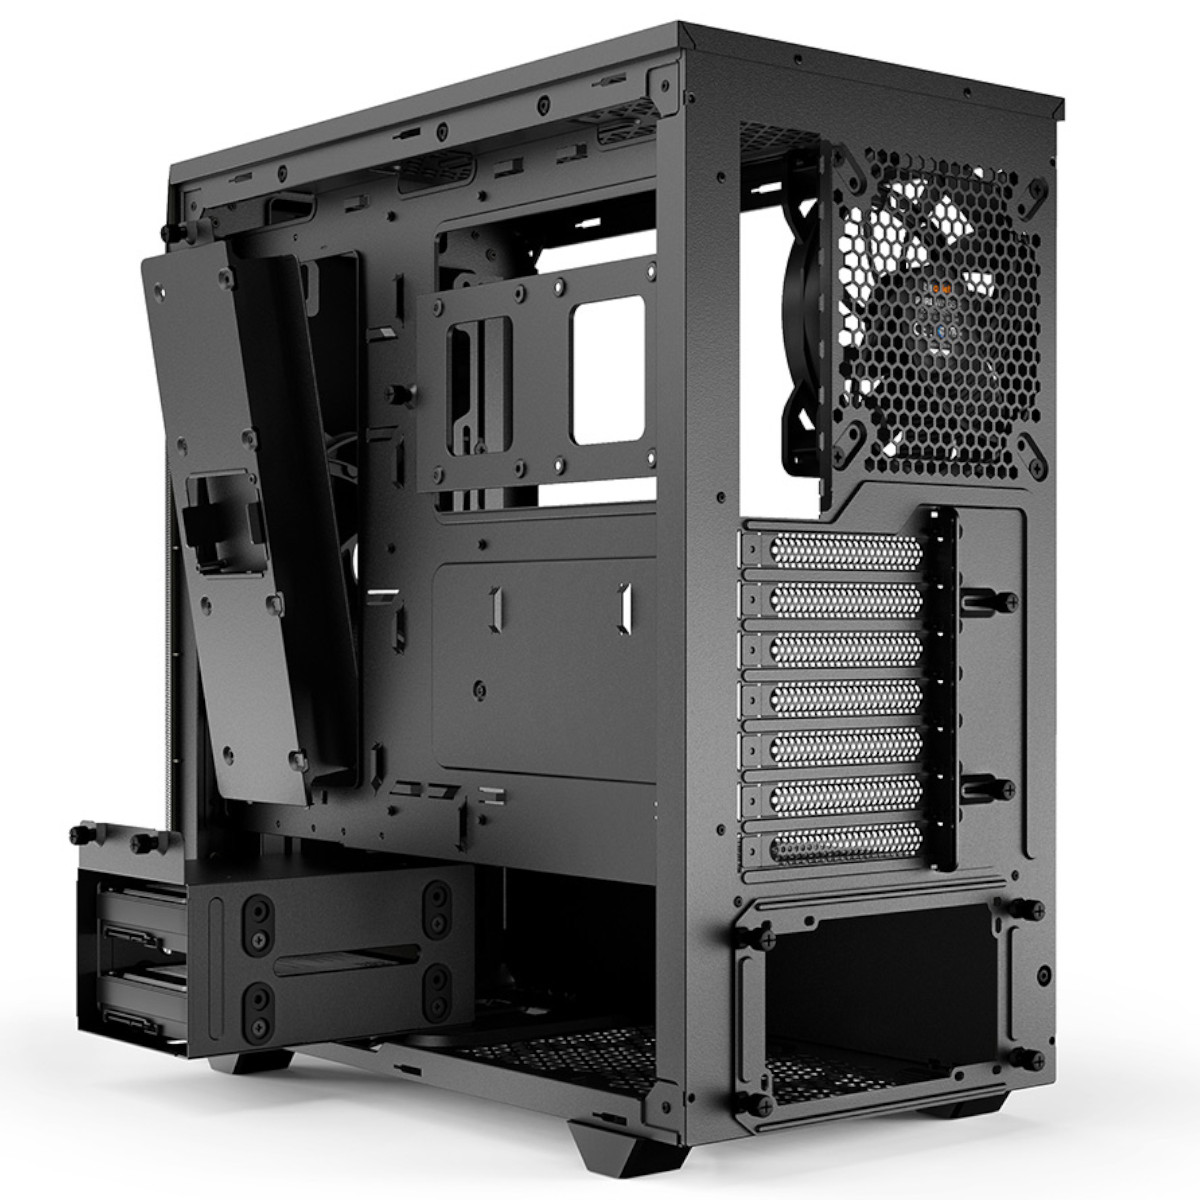 be quiet! - be quiet! Pure Base 500 Midi Tower Case - Black Tempered Glass